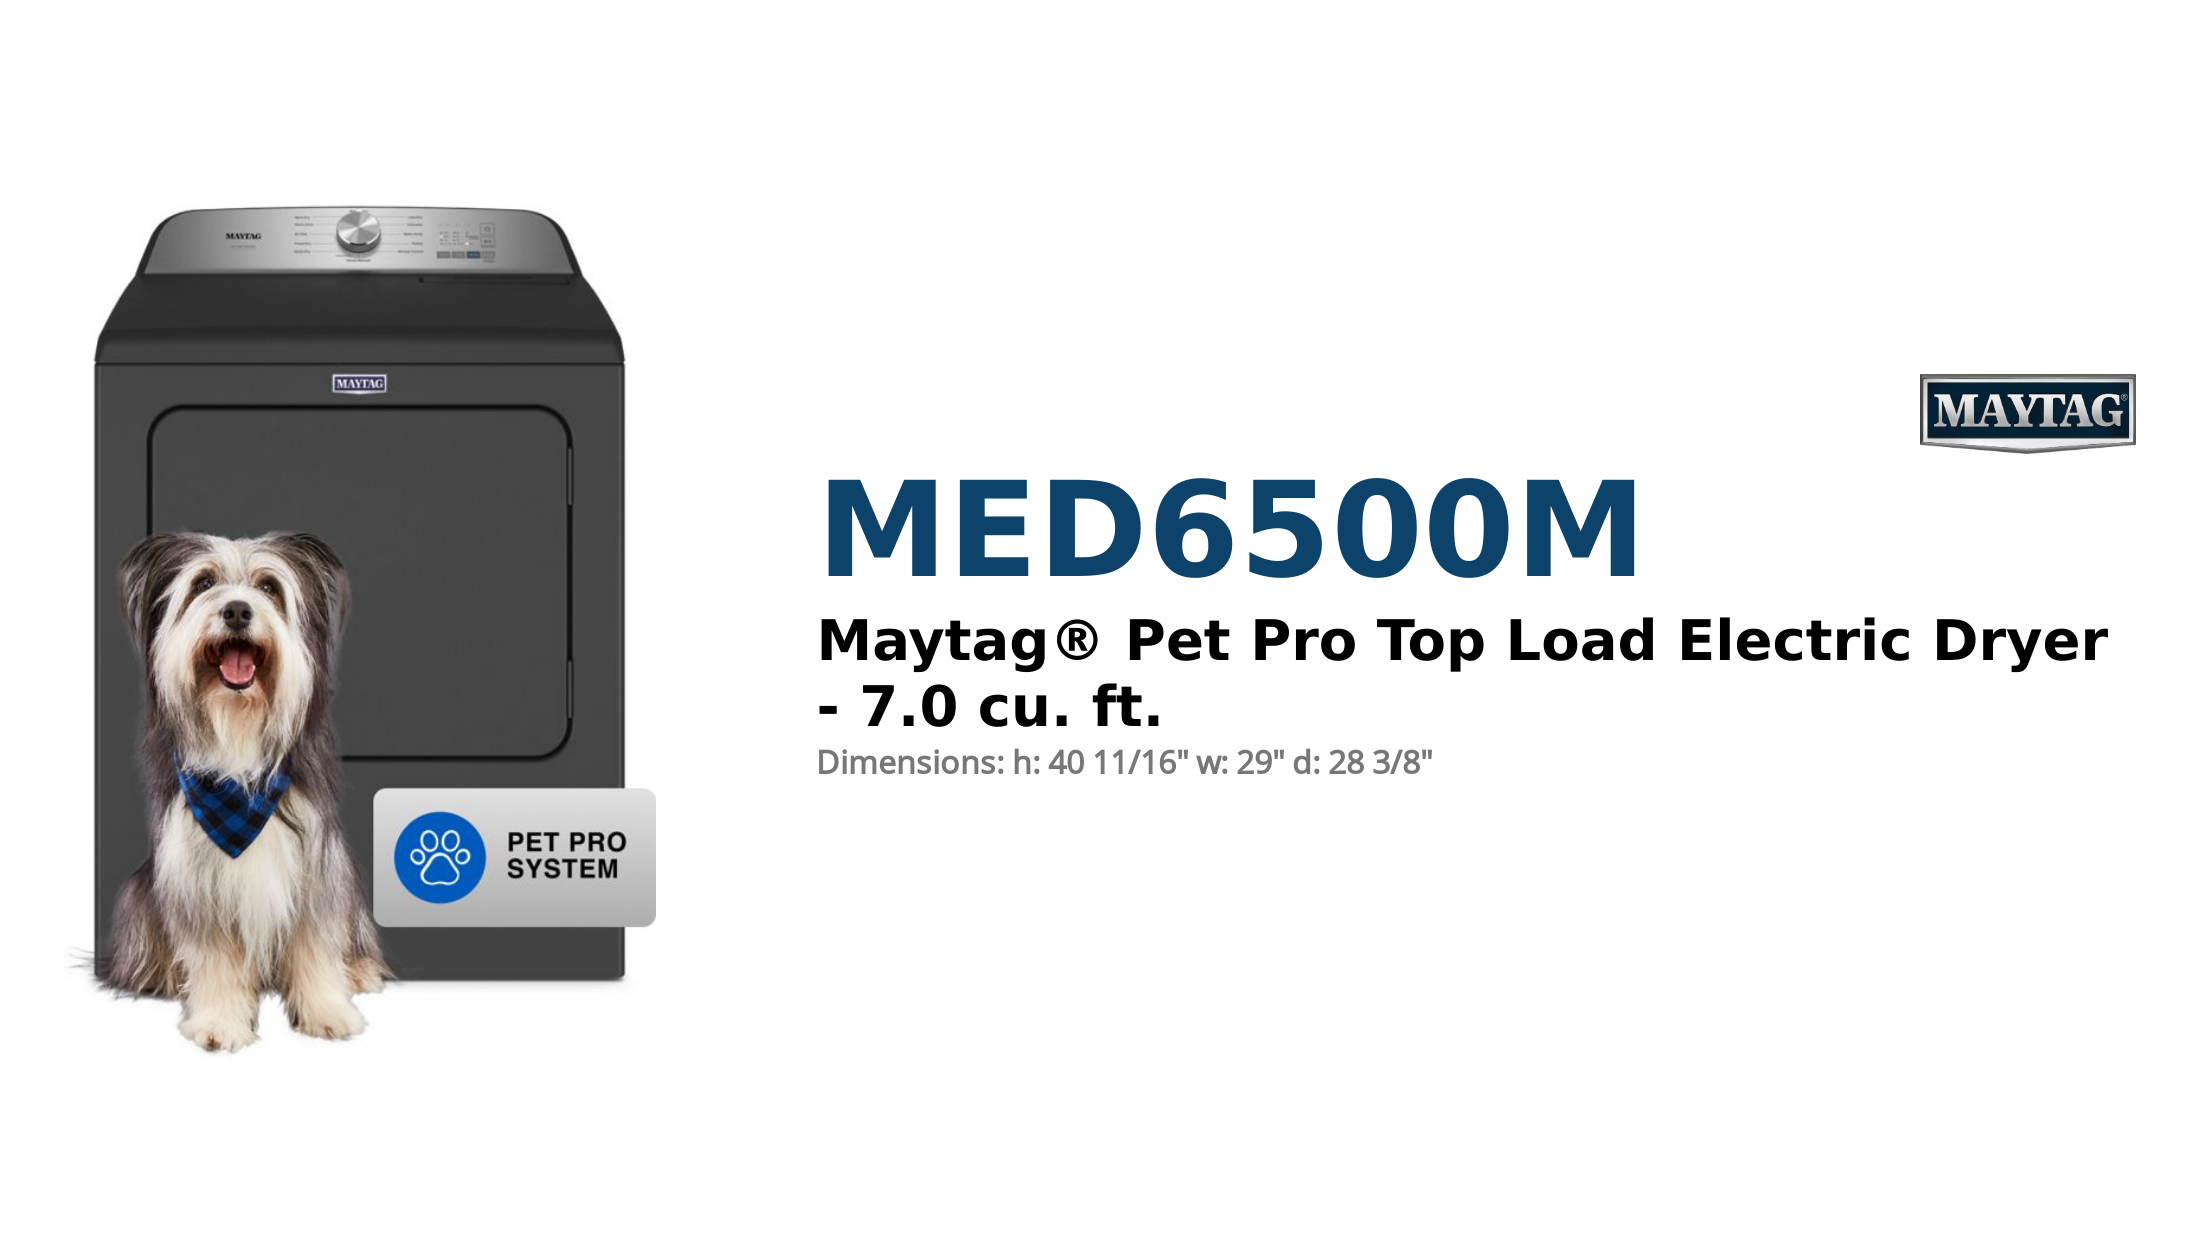 Maytag® Pet Pro Top Load Electric Dryer - 7.0 cu. ft.